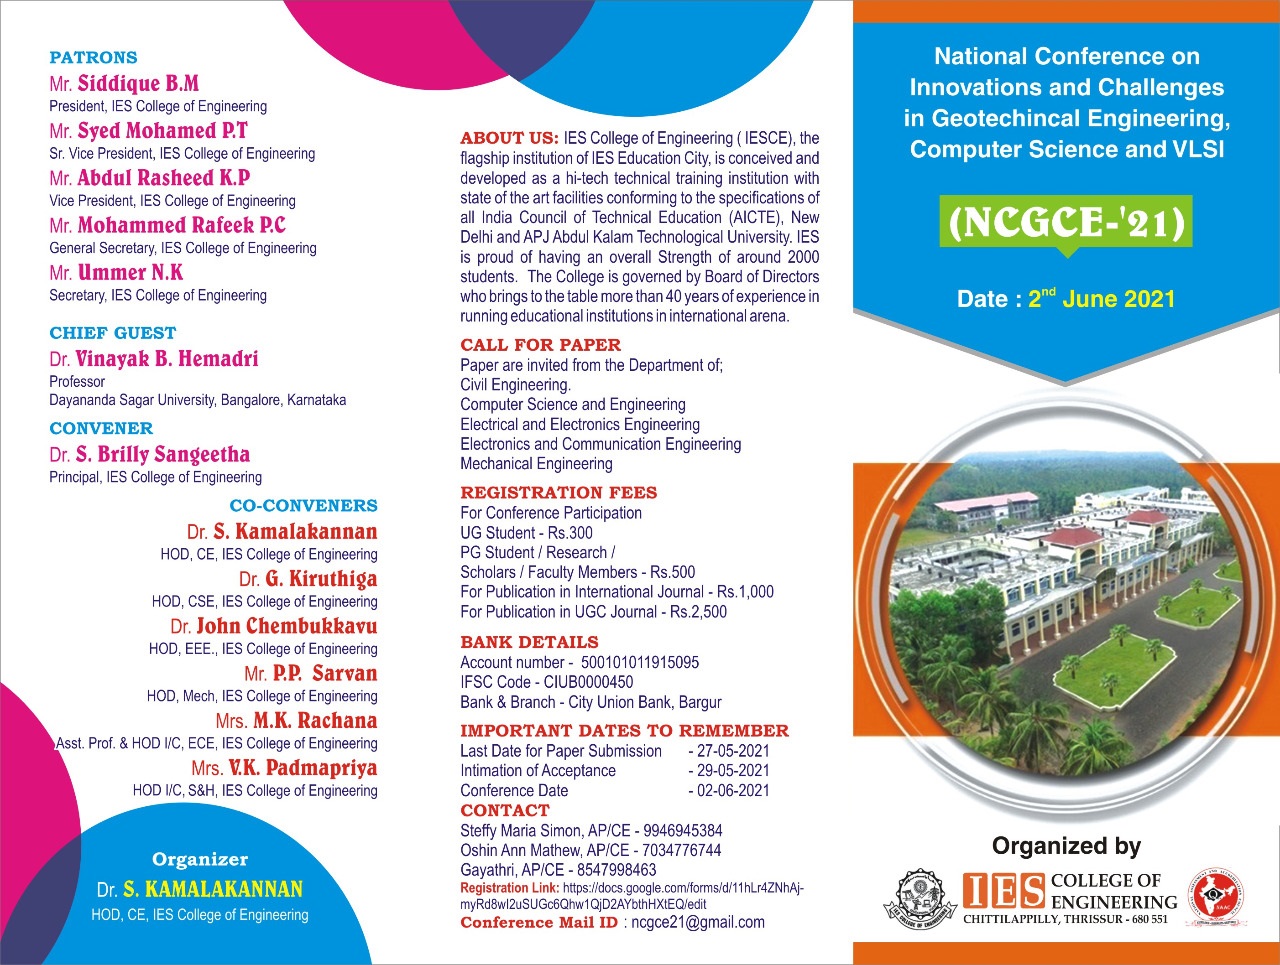 National Conference on Innovations and Challenges in Geotechnical Engineering, Computer Science and VLSI NCGCE 21